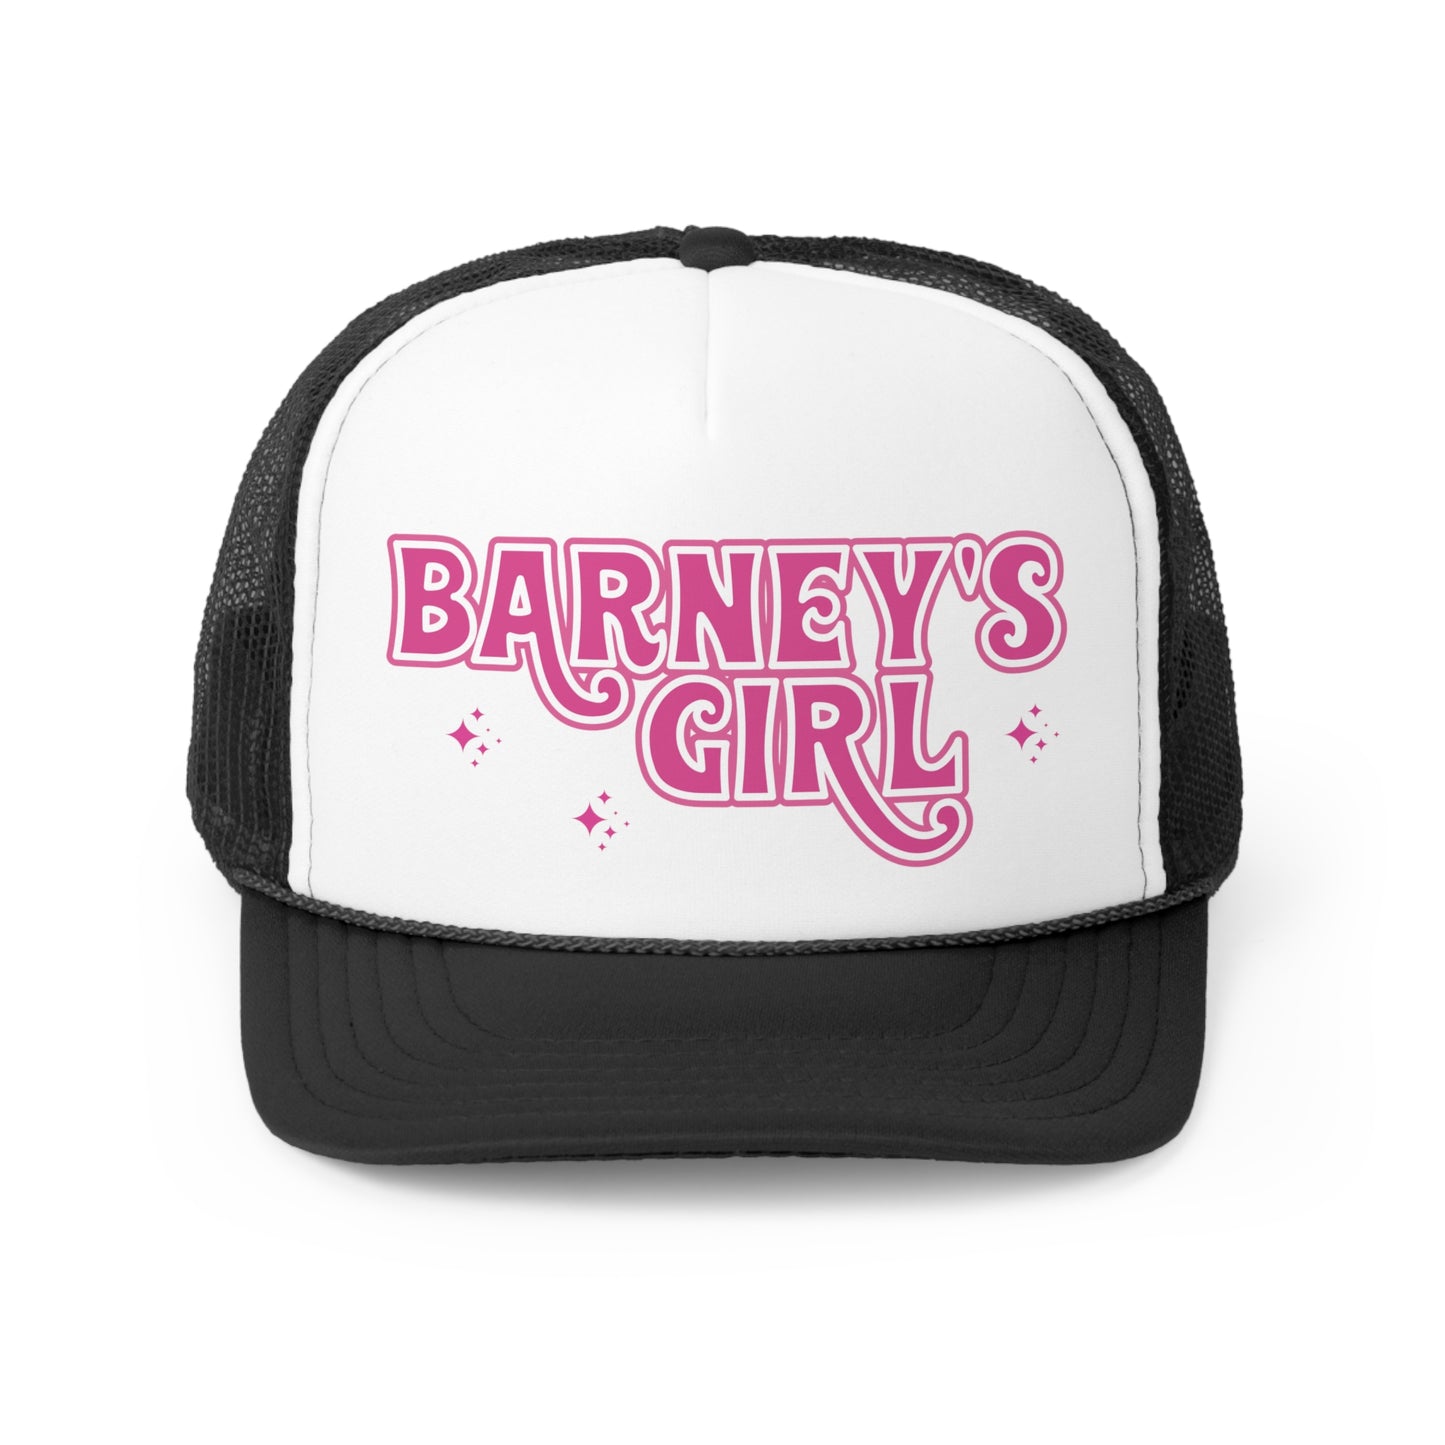 Barney's Girl | BARNEY'S BEANERY - Trucker Hat | Pink Graphic On Black And White Trucker Hat, Front View